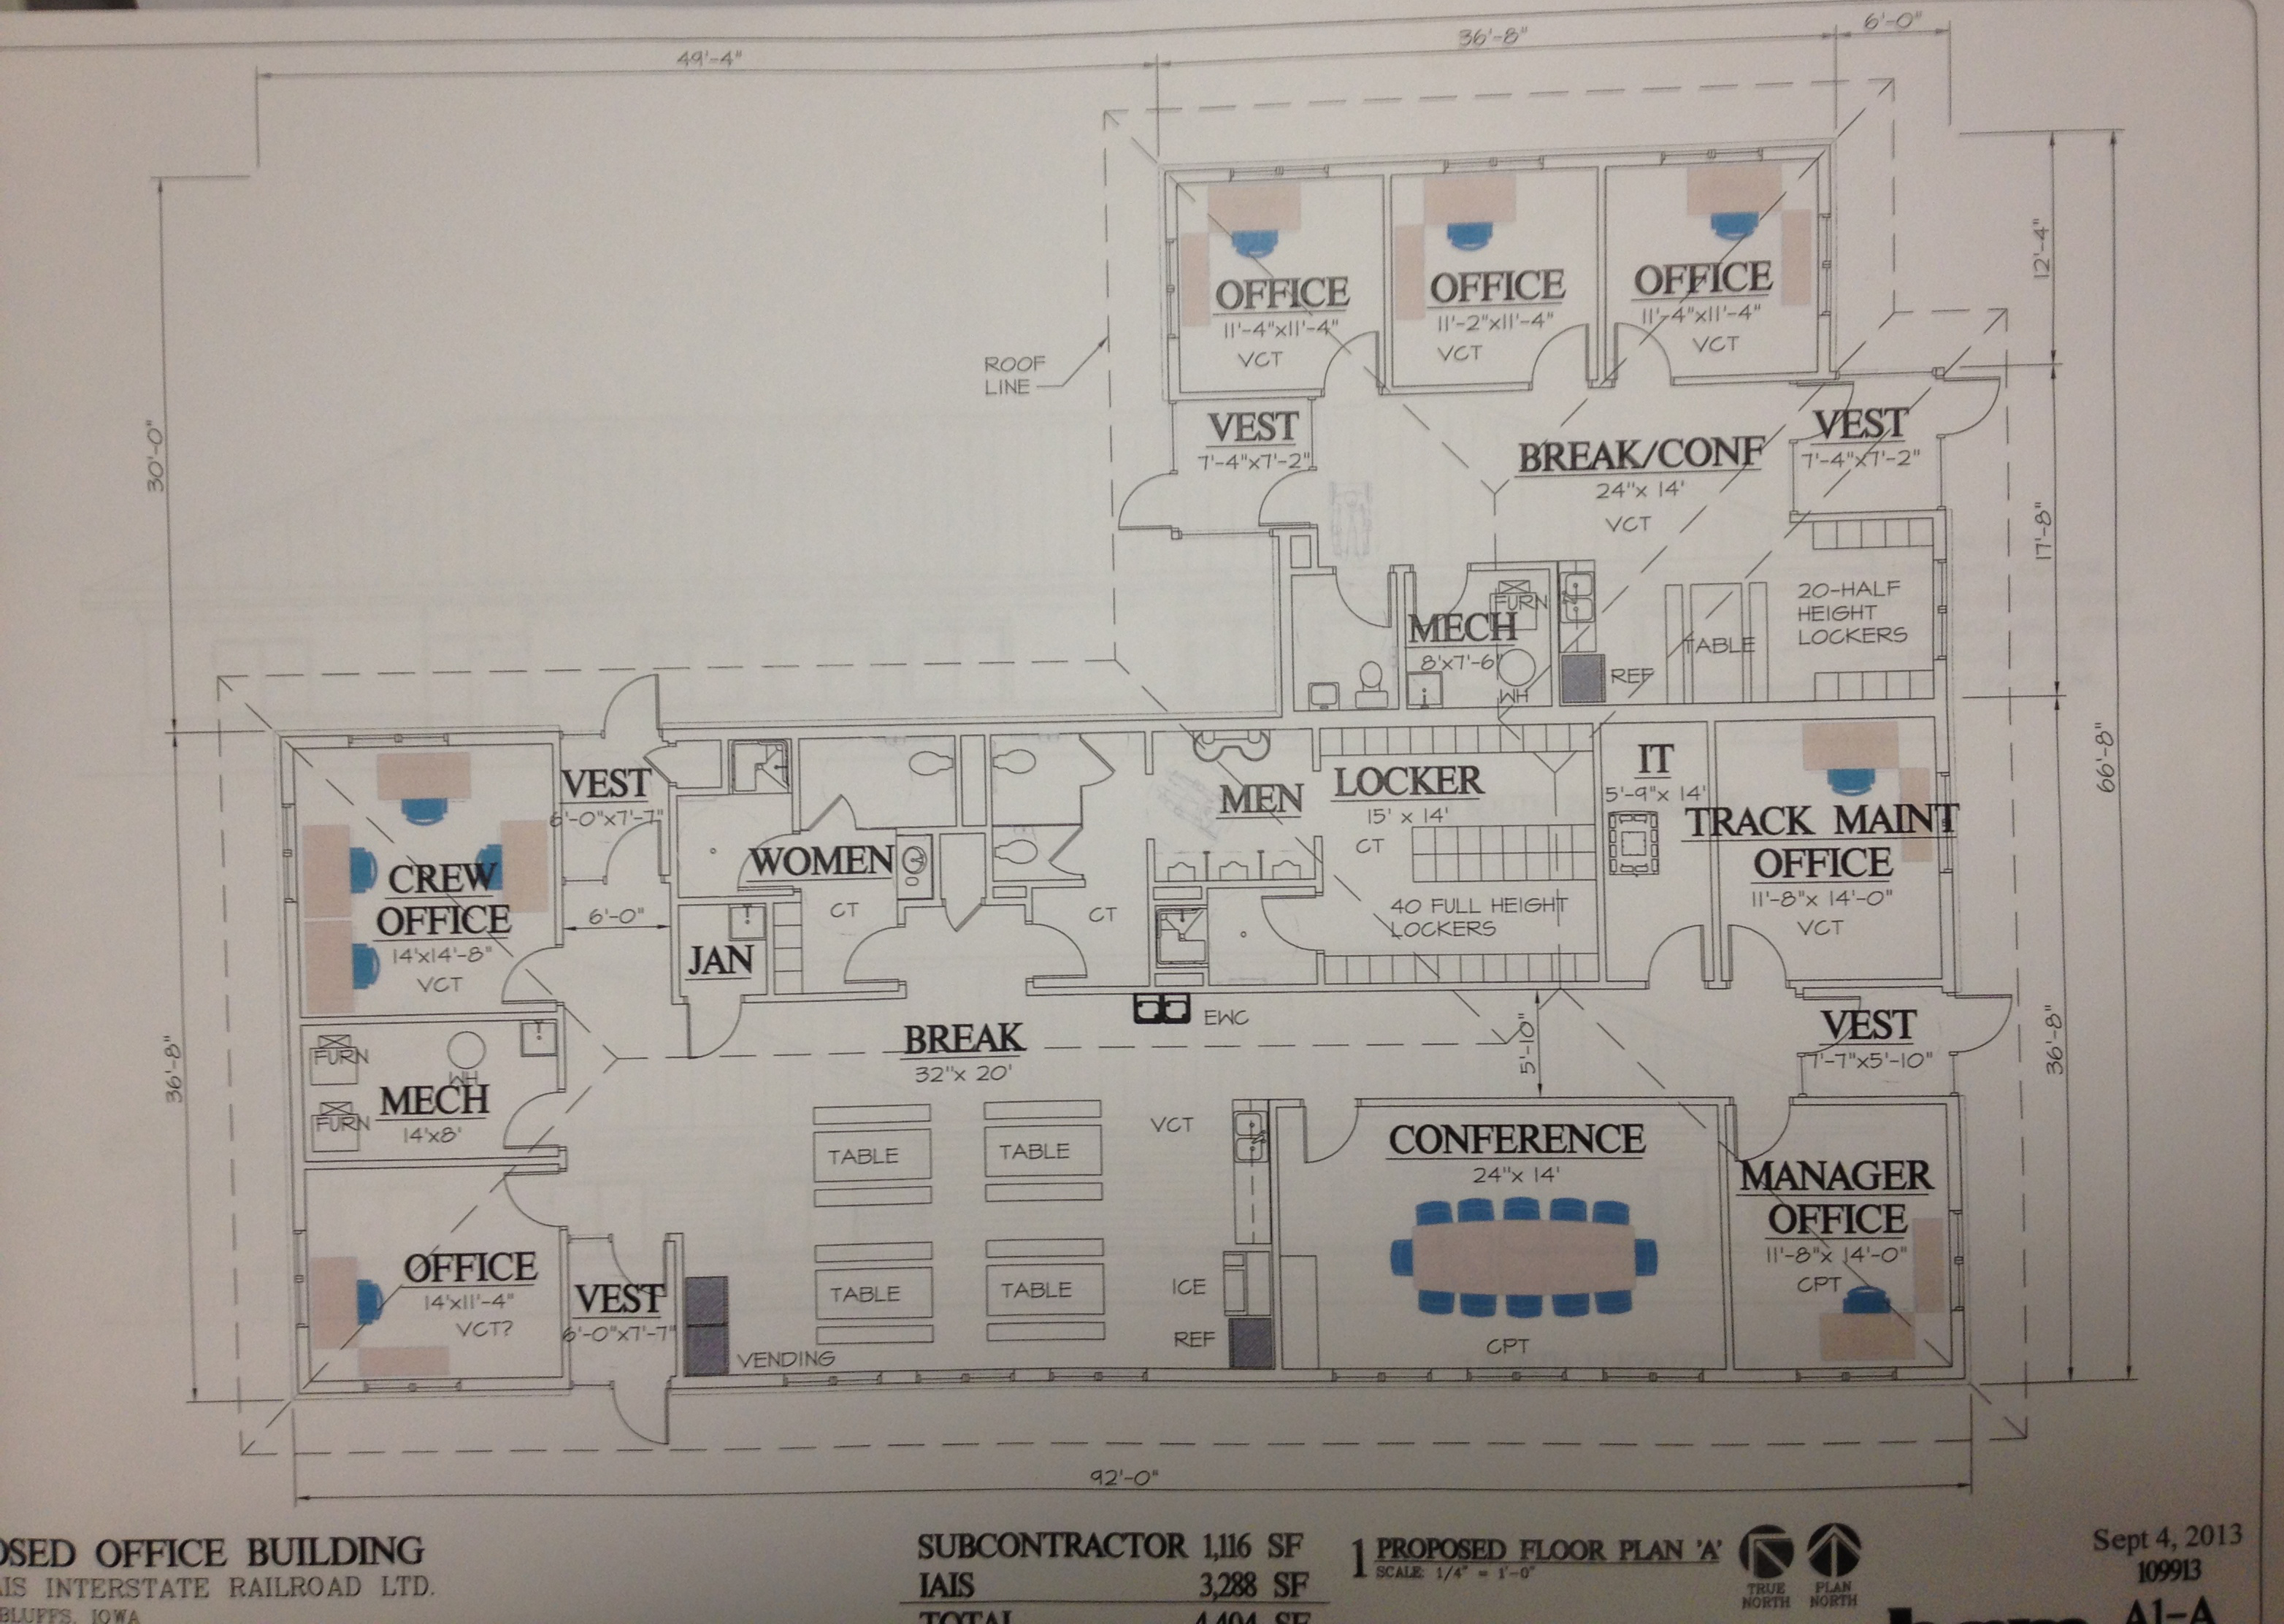 Floor plan.  I'm guessing that the "Subcontractor" area, as well as the parking lot south of the building, is likely set aside for the intermodal subcontractor, replacing the trailers and modular units they've worked out of since IAIS startup almost 30 years ago.